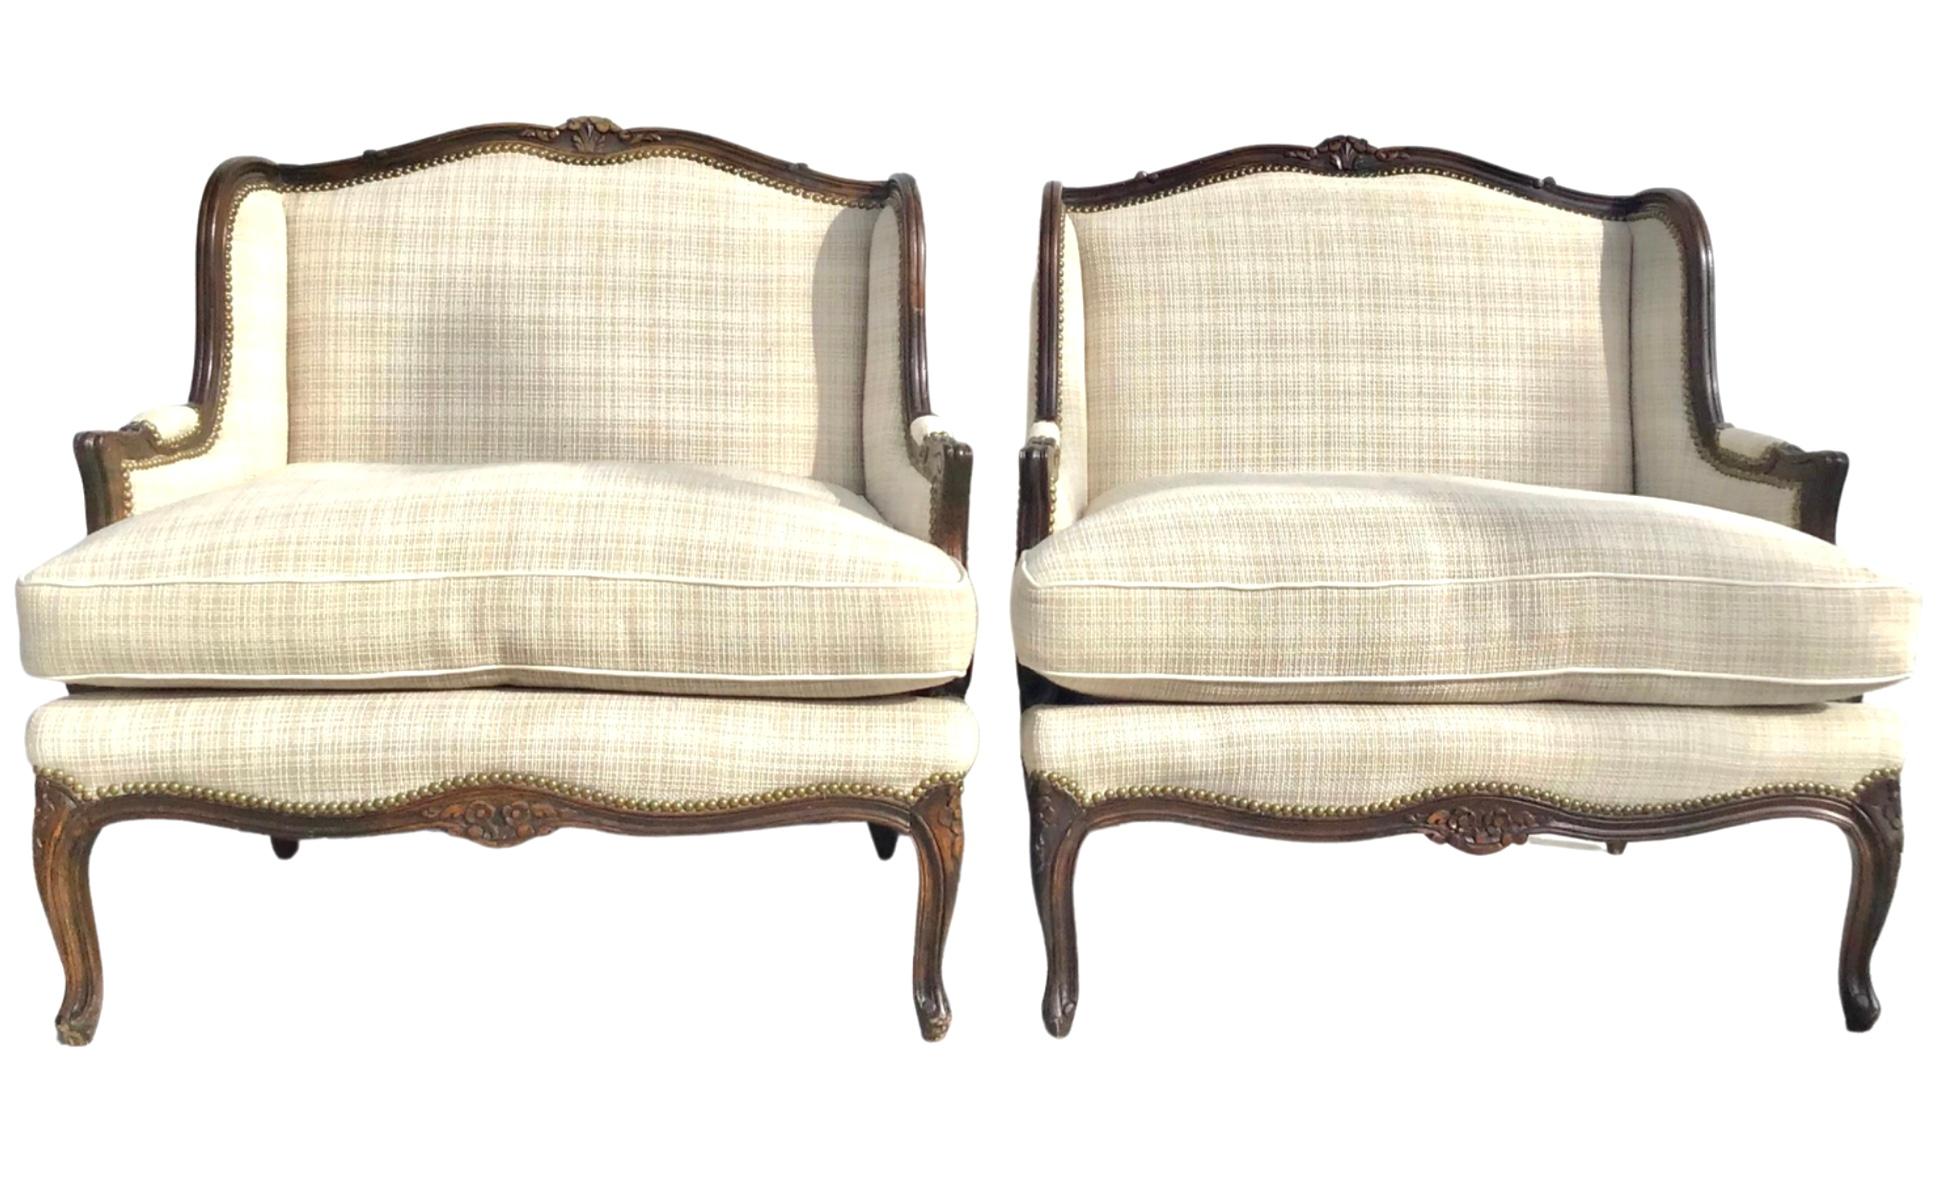 A pair of plush French Louis XV style Bergere or Marquis lounge chairs. The chairs are made of solid carved wood with the back and covered in a luxurious cotton fabric with brass nail heads. Sumptuous down cushions. Both cushions are removable. The